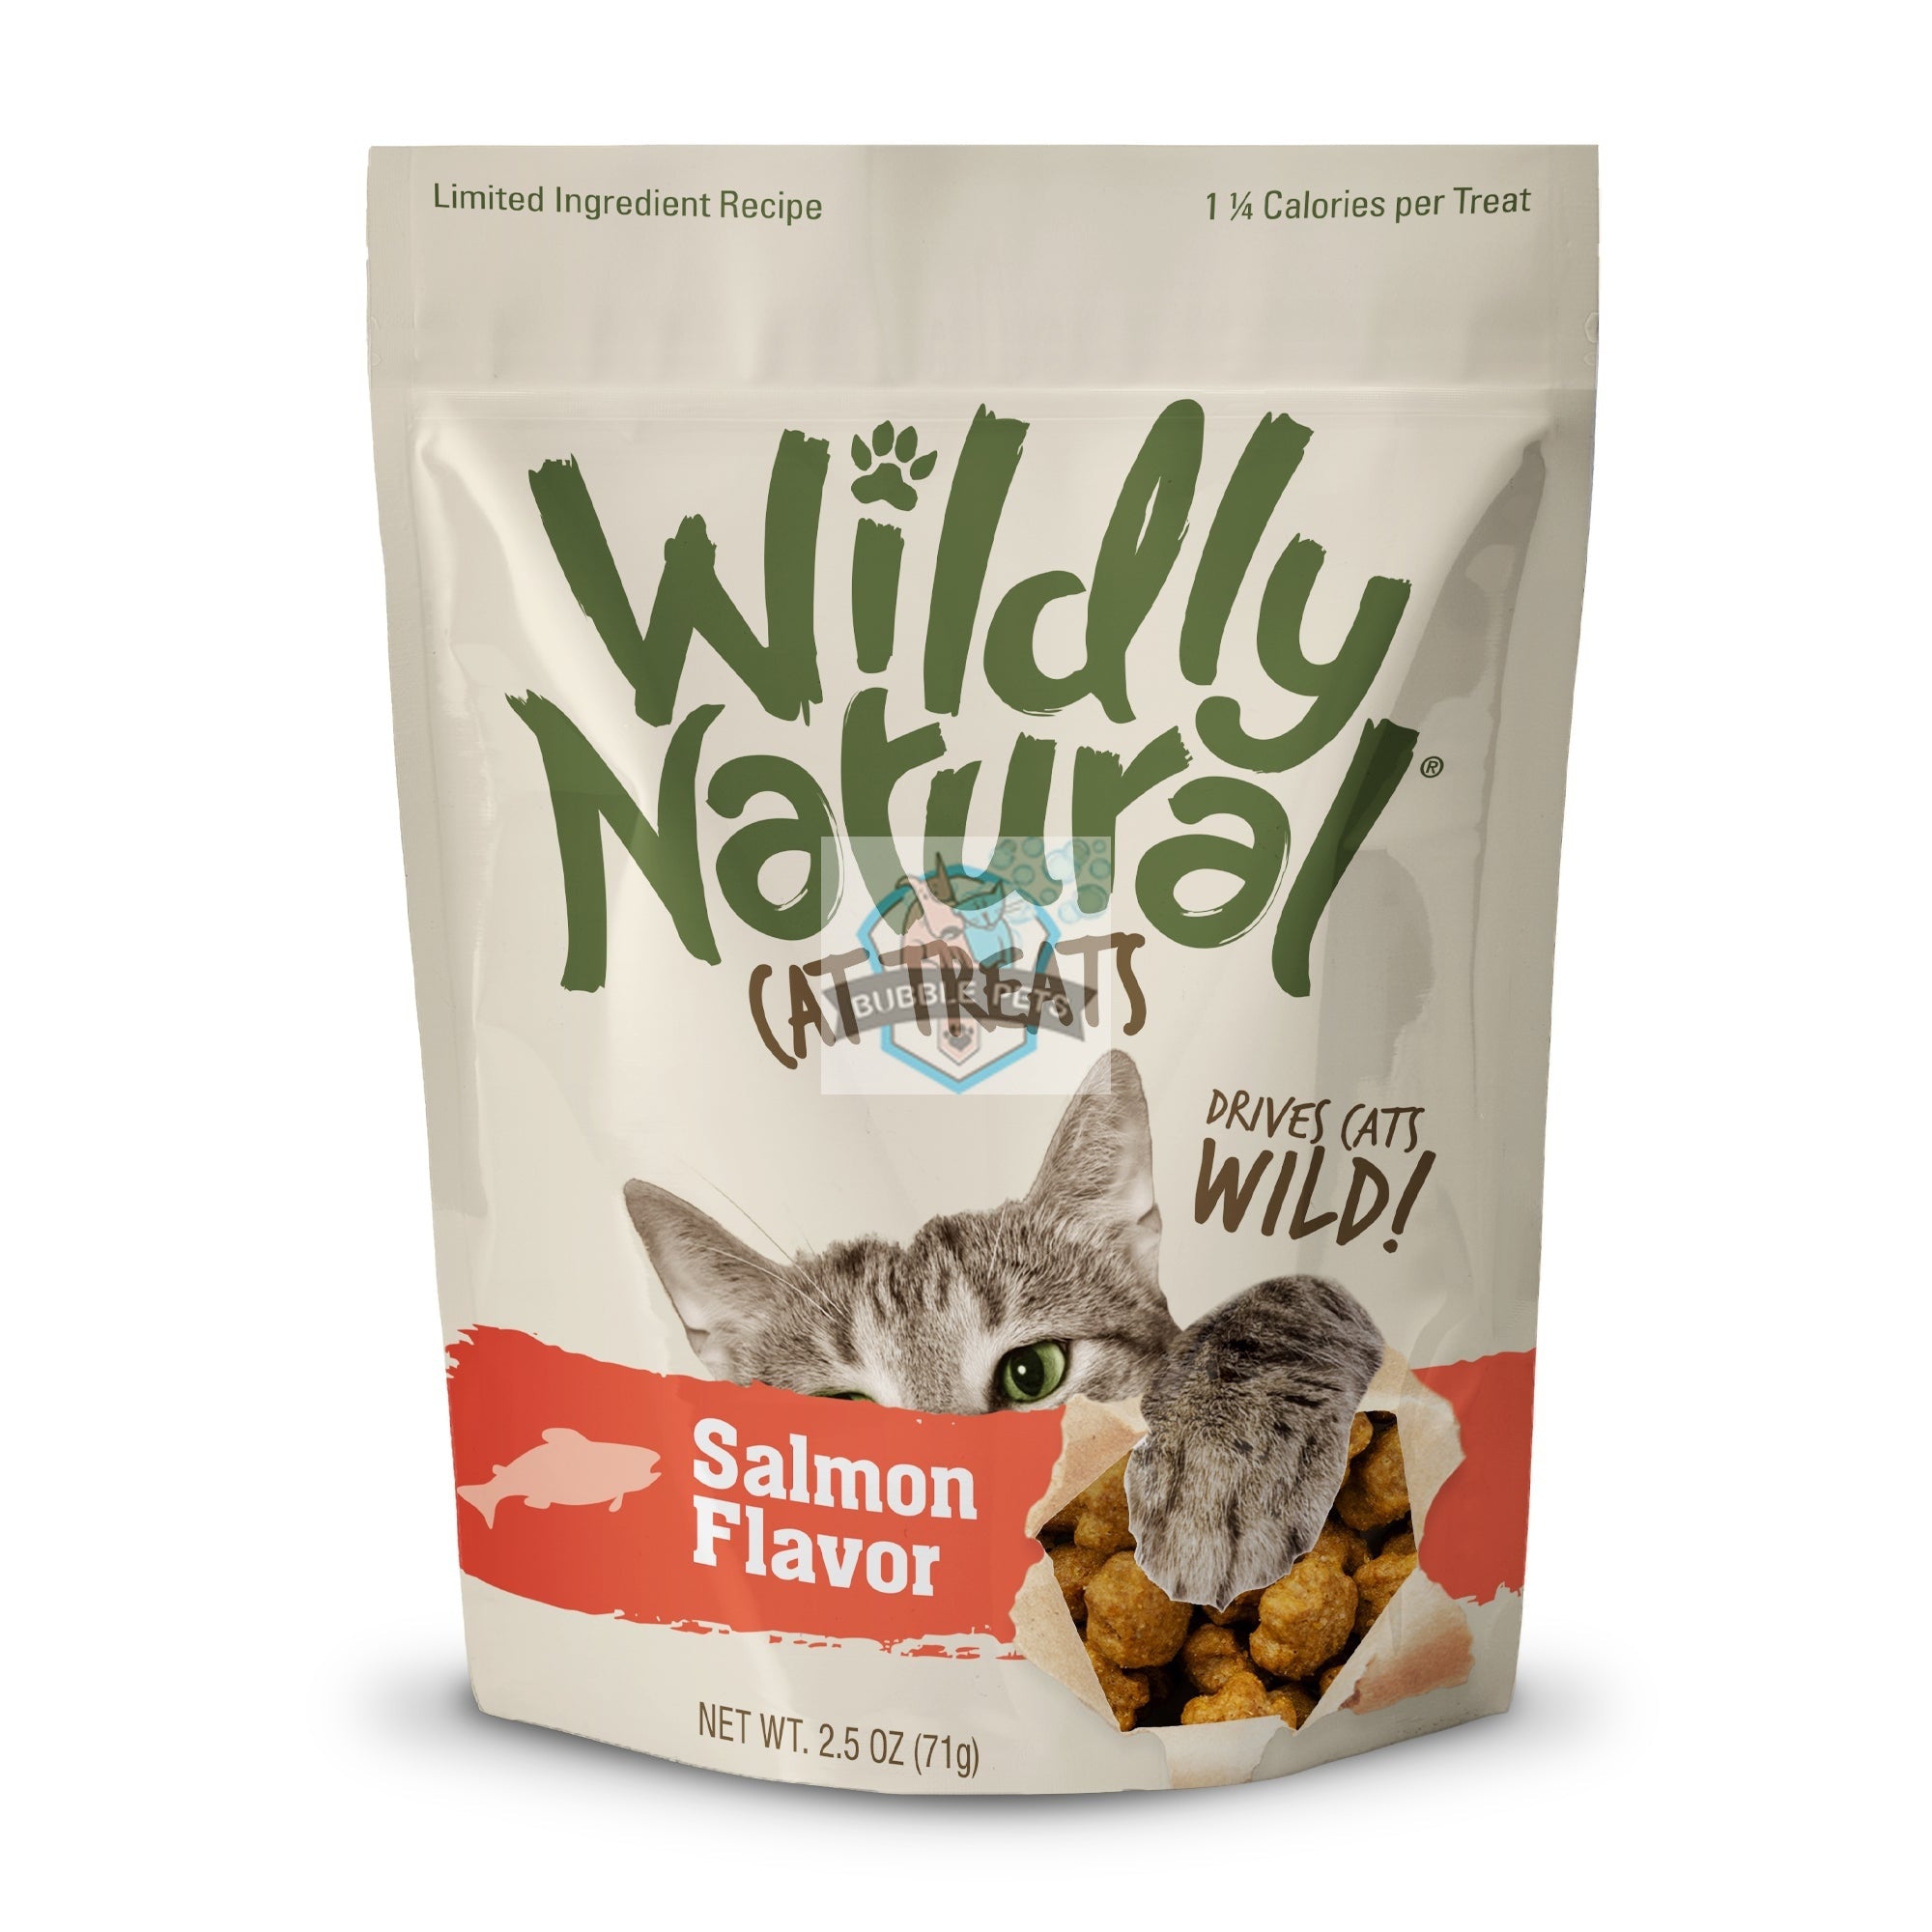 Fruitables Wildly Natural Wild Caught Salmon Cat Treats